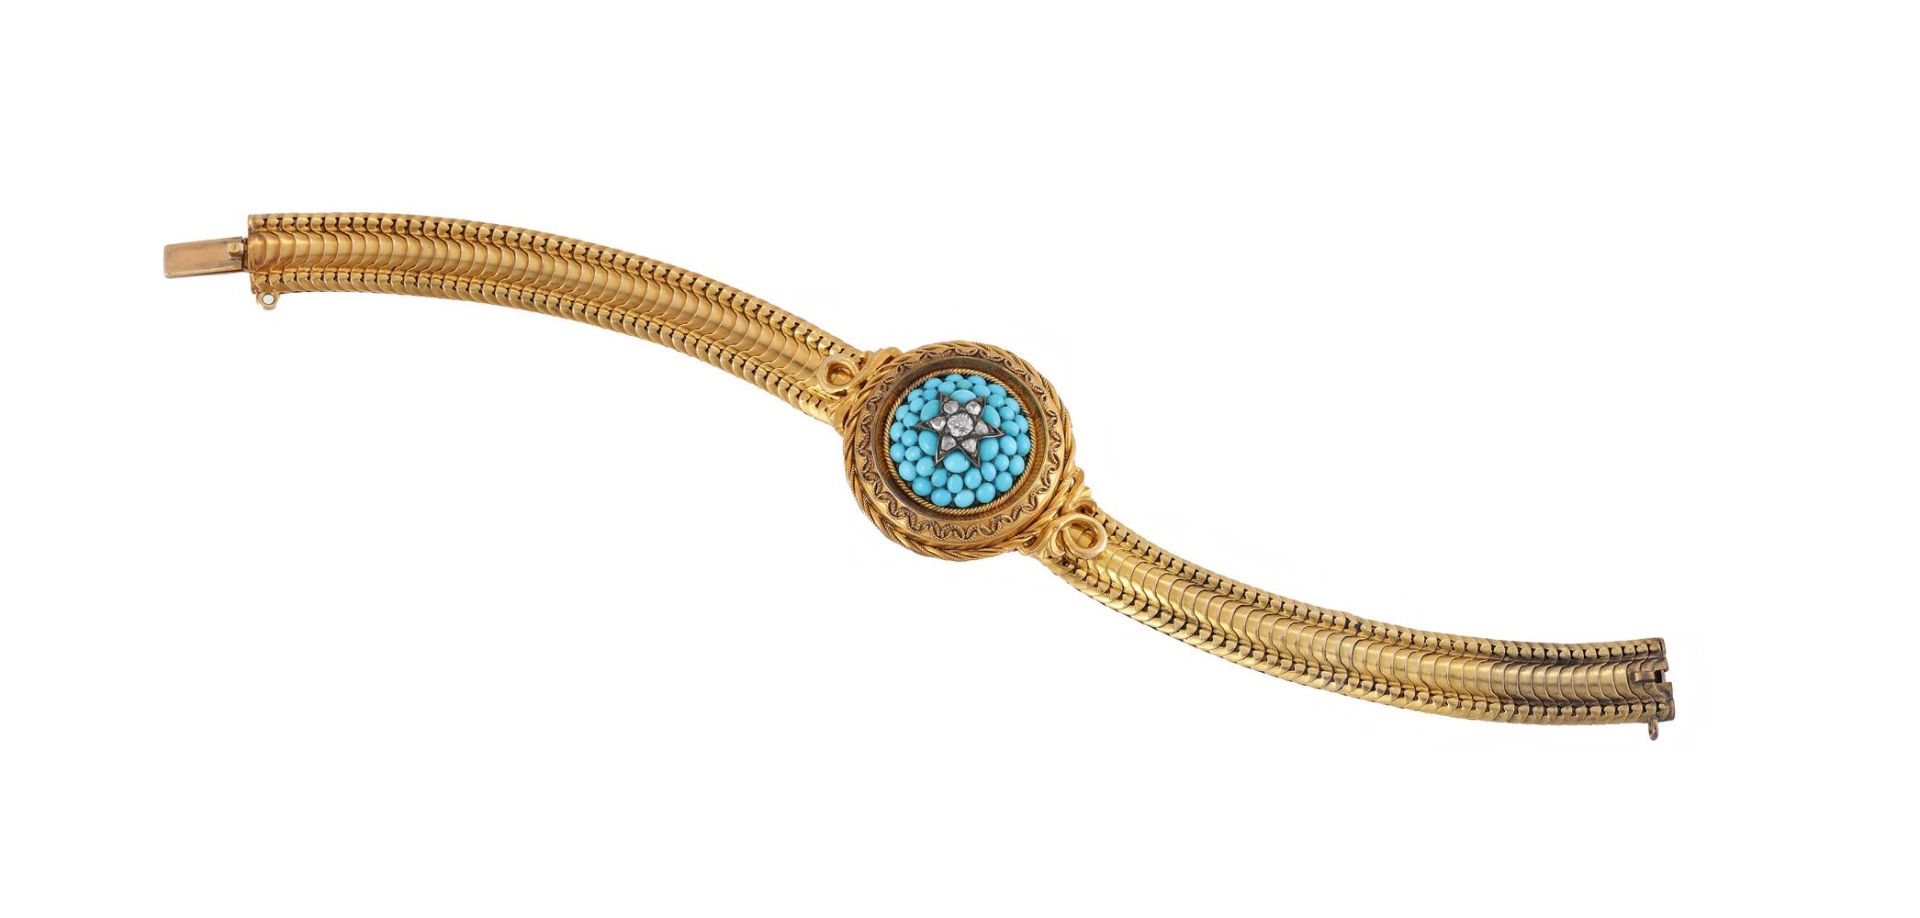 A MID VICTORIAN GOLD, TURQUOISE AND DIAMOND BRACELET